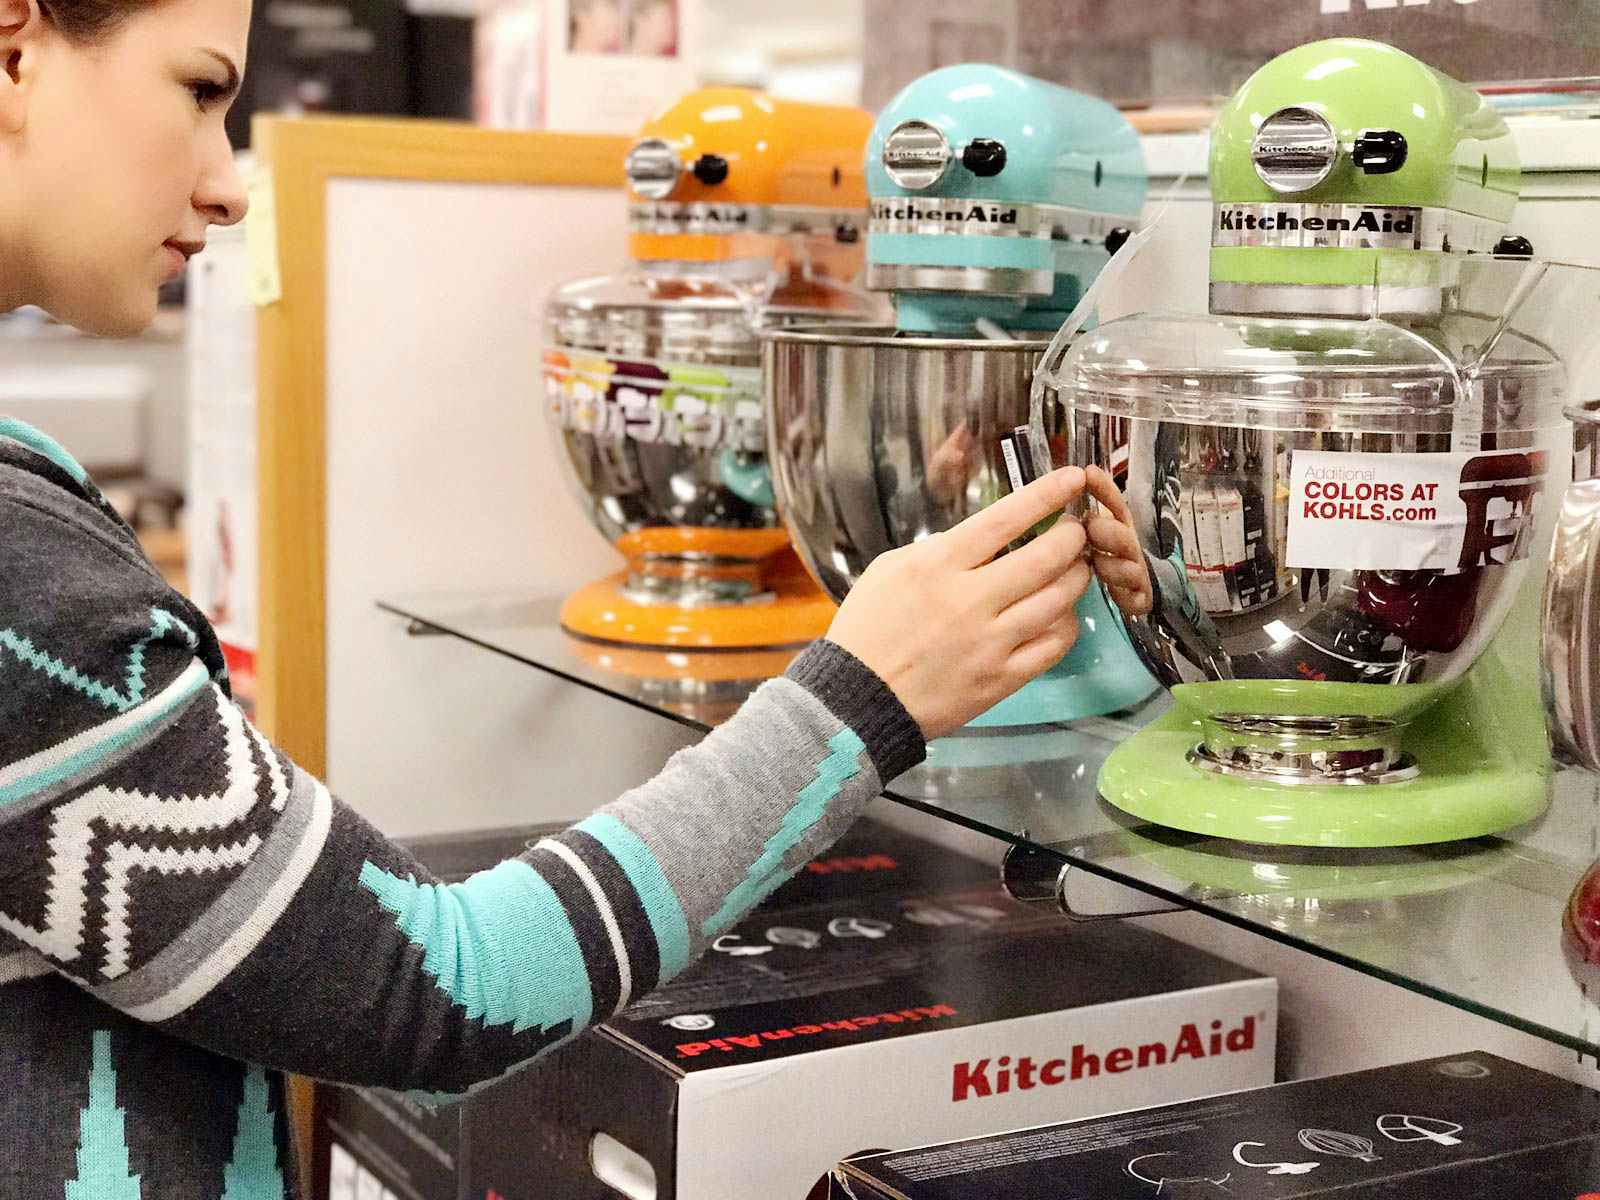 KitchenAid Just Launched a New Stand Mixer Attachment—and It's a